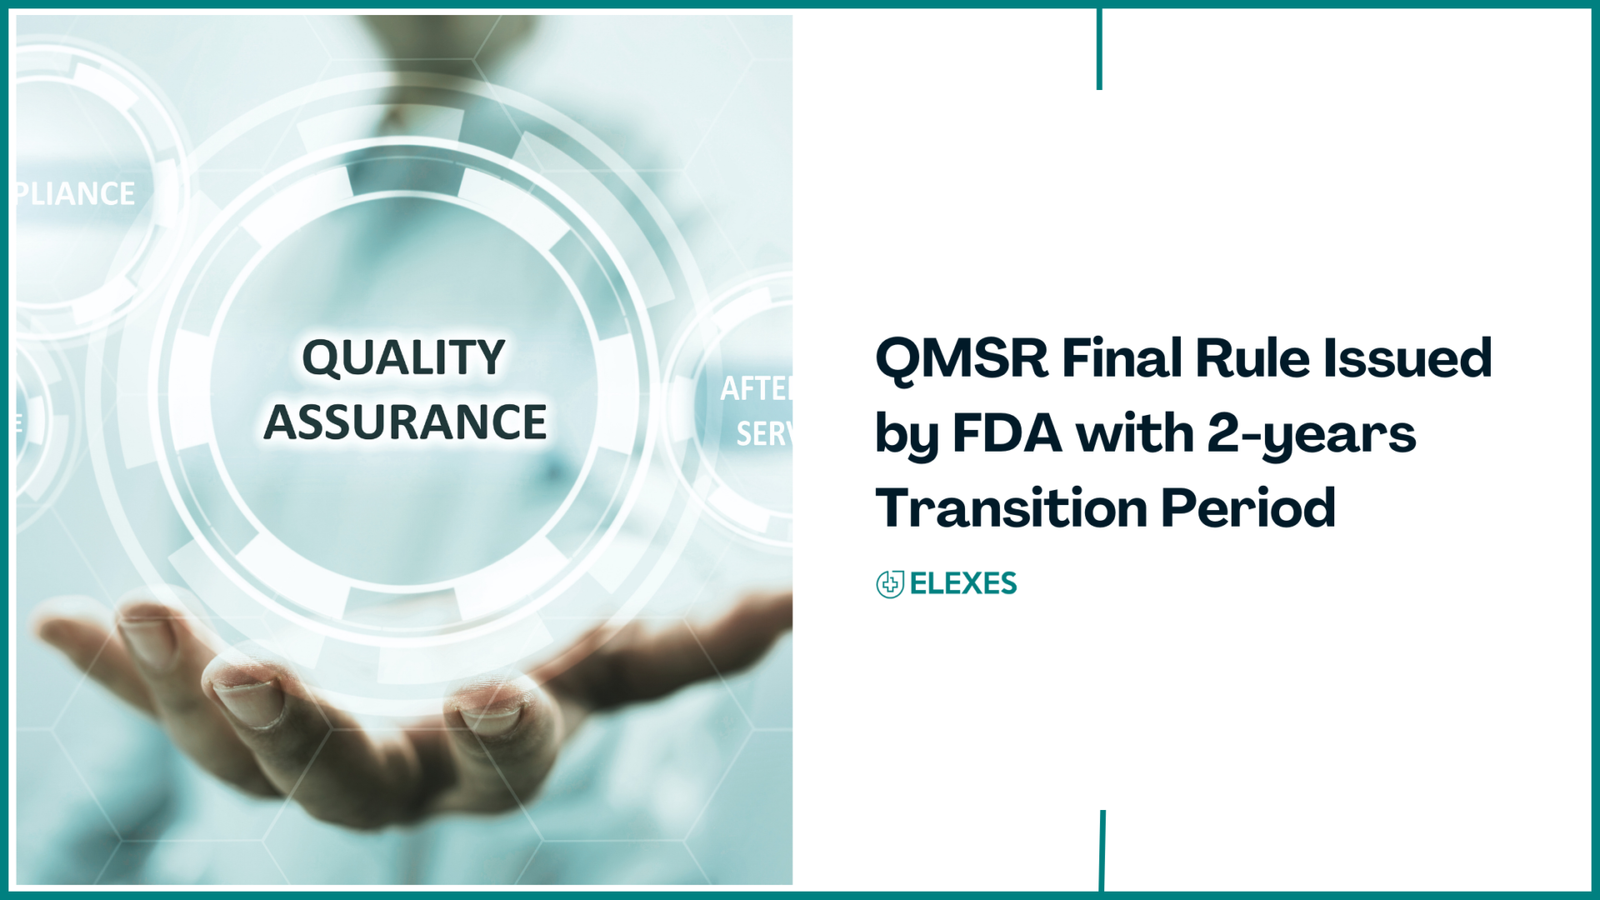 FDA QMSR Final Rule Issued by FDA with 2-years Transition Period